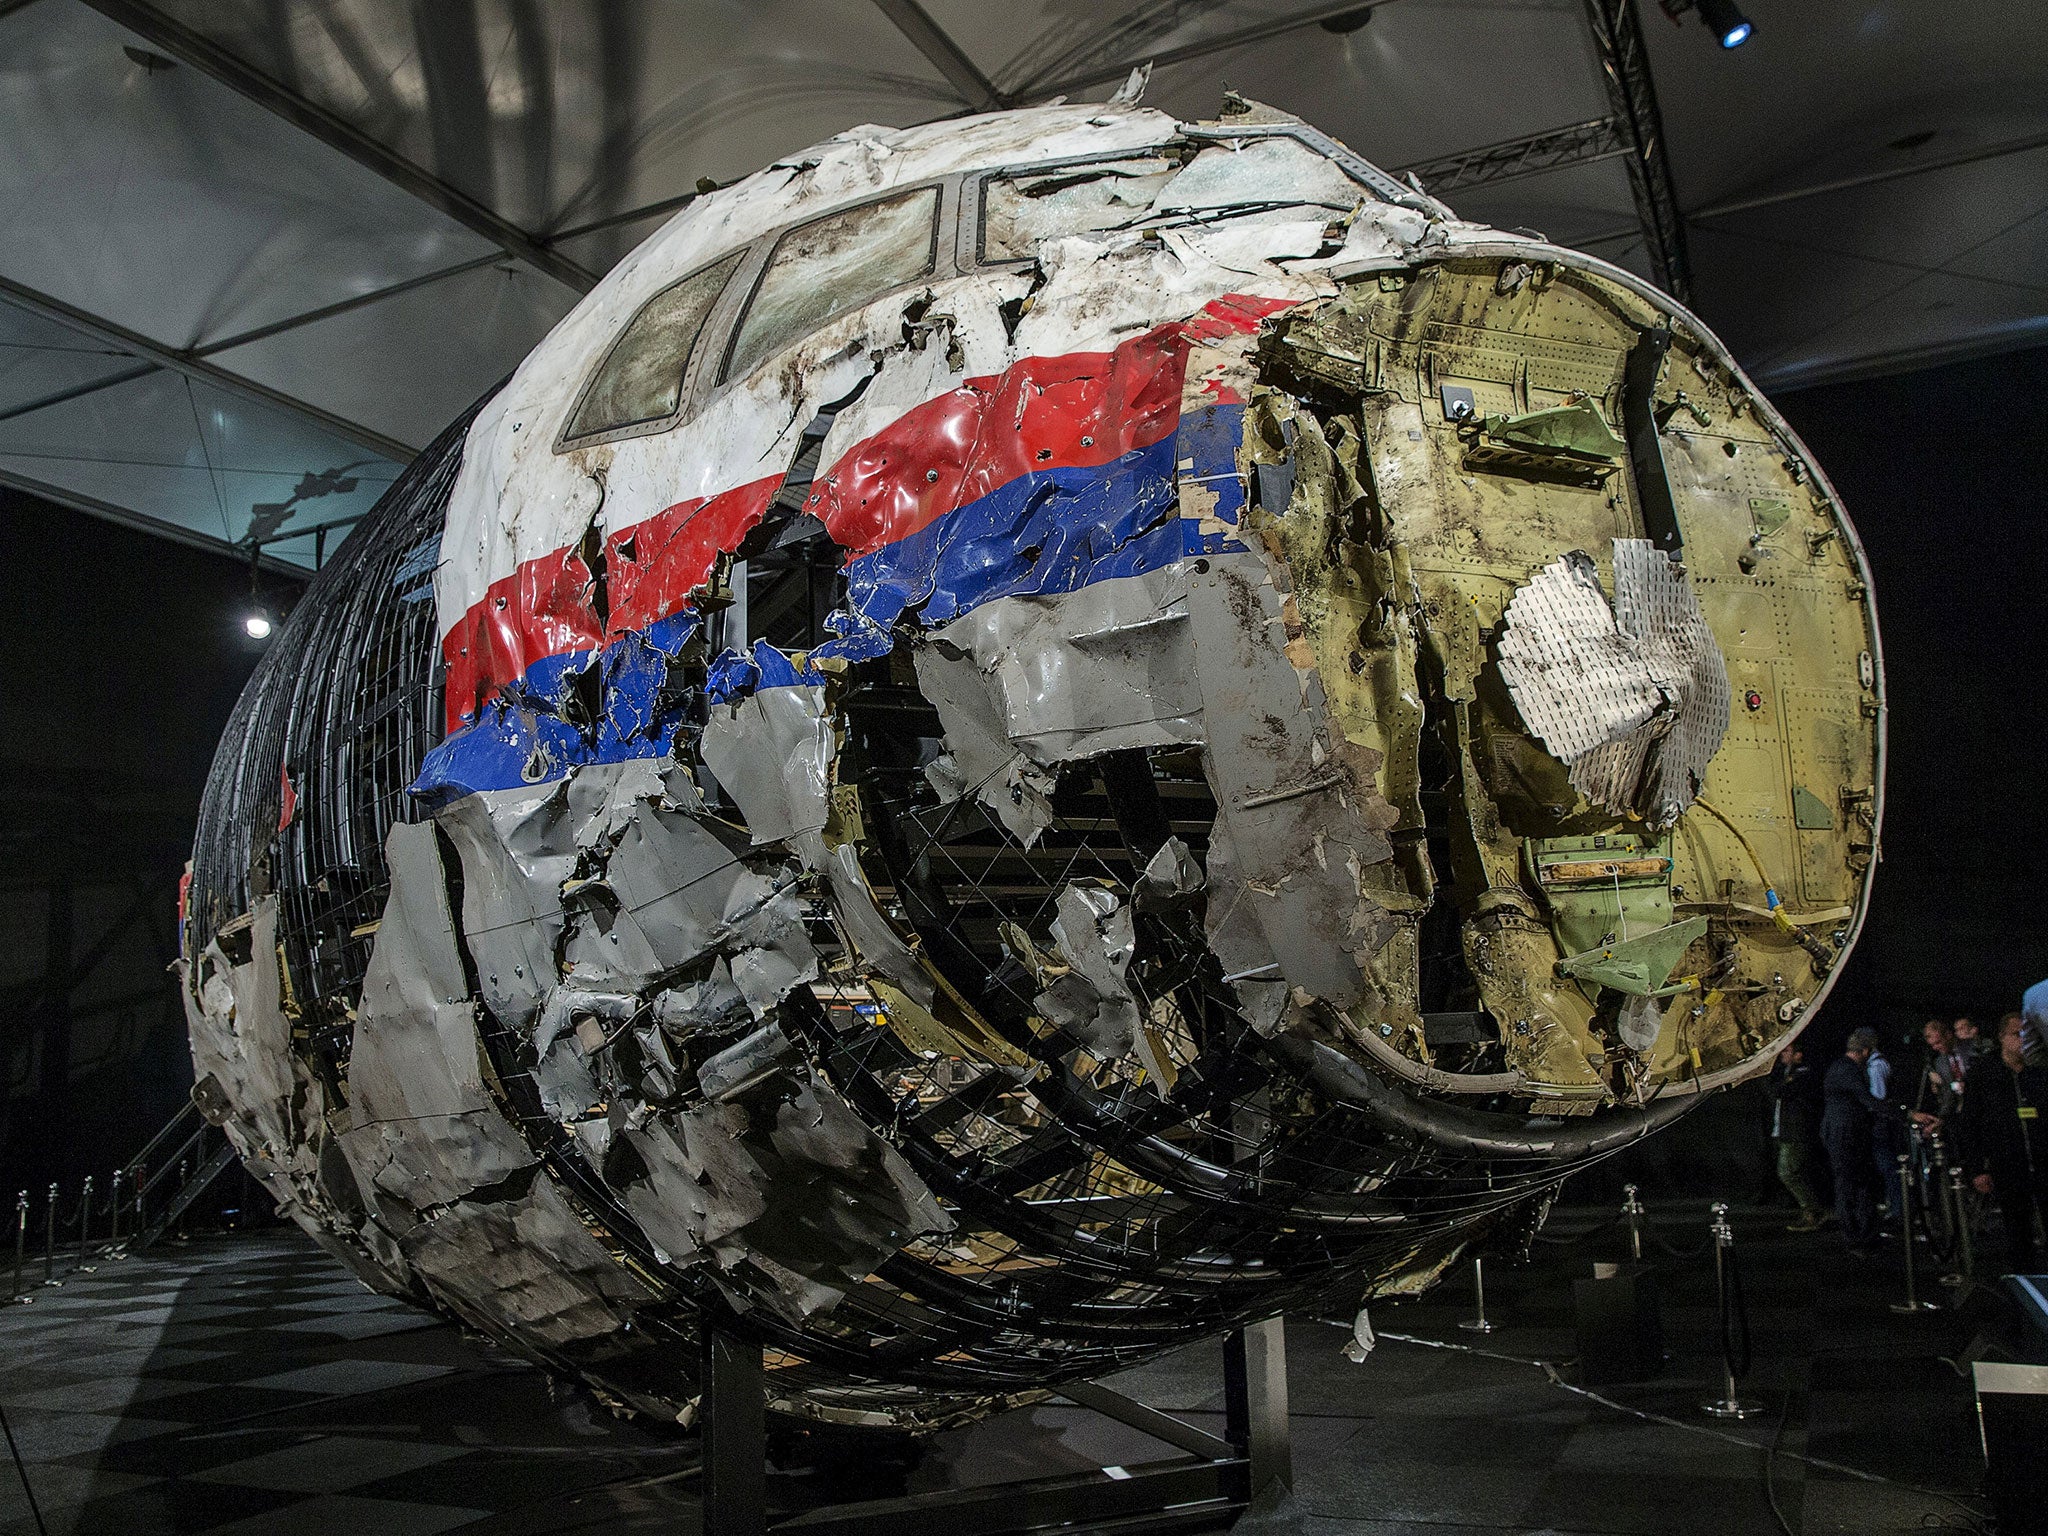 The reconstructed wreckage of Malaysia Airlines flight MH17